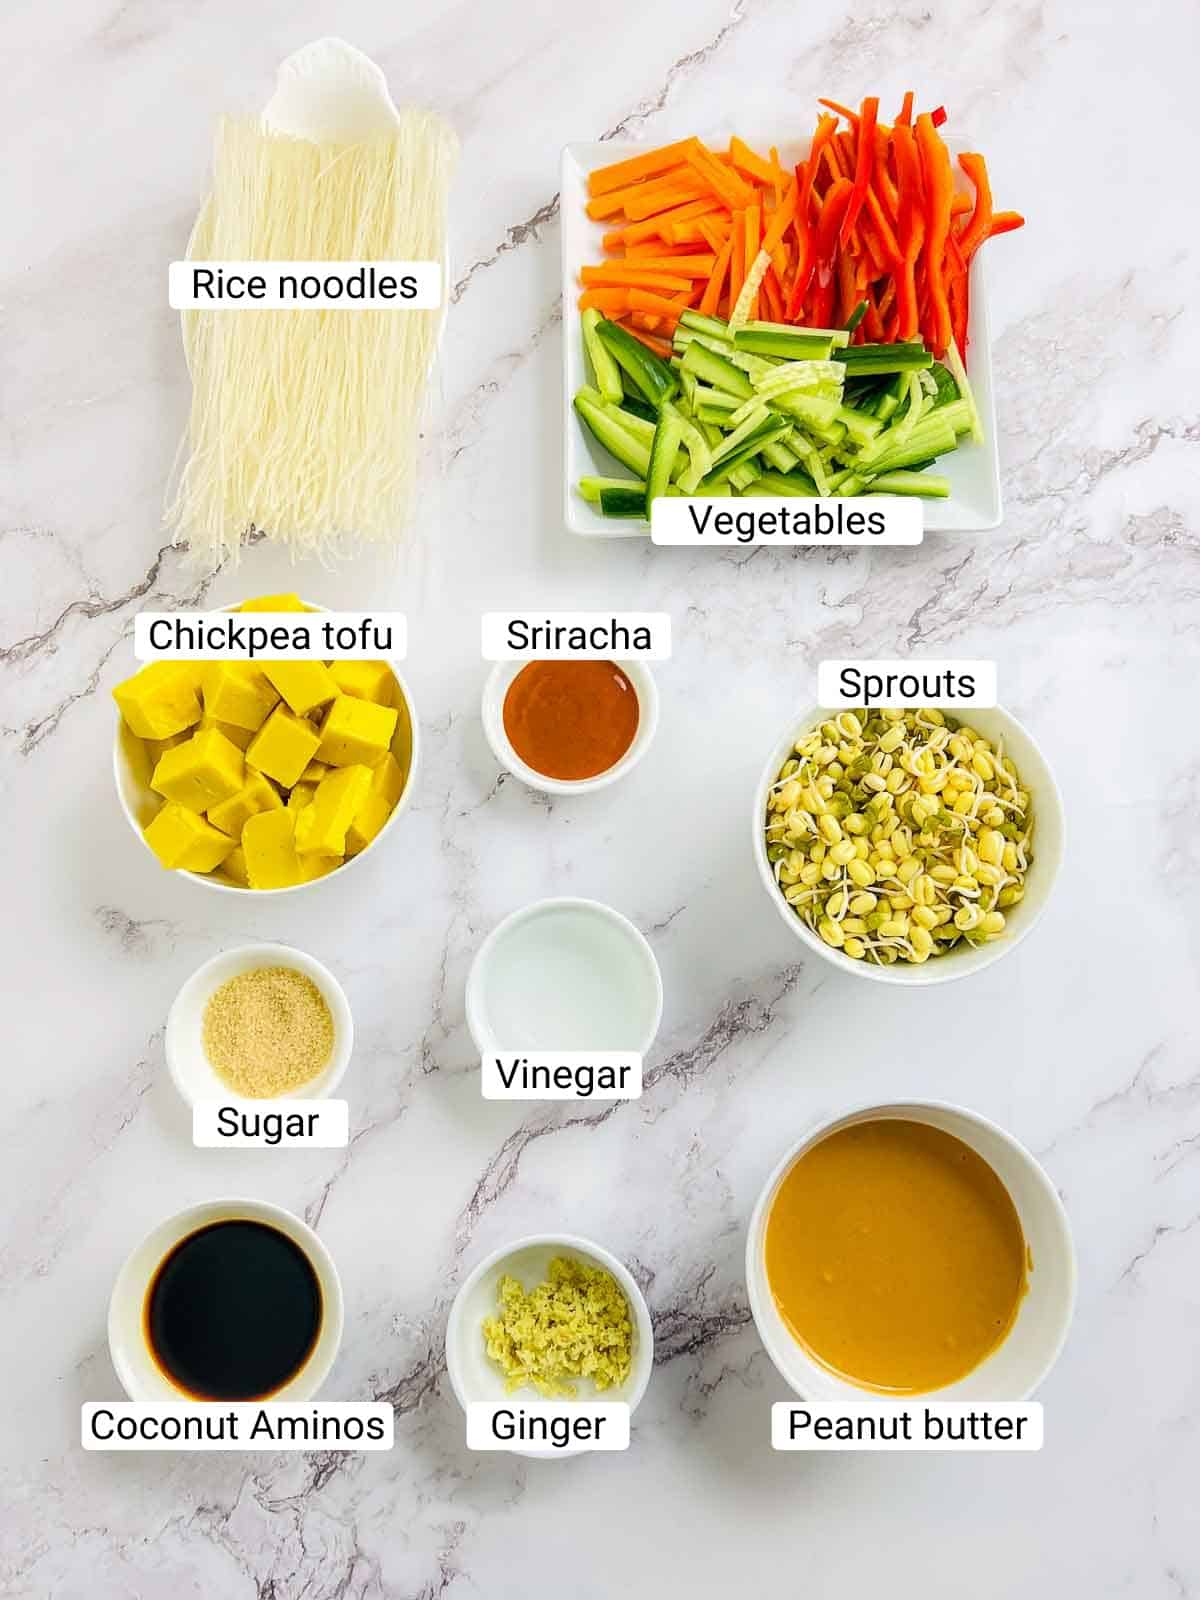 Ingredients to make the chickpea tofu Buddha bowl placed on a marble surface.